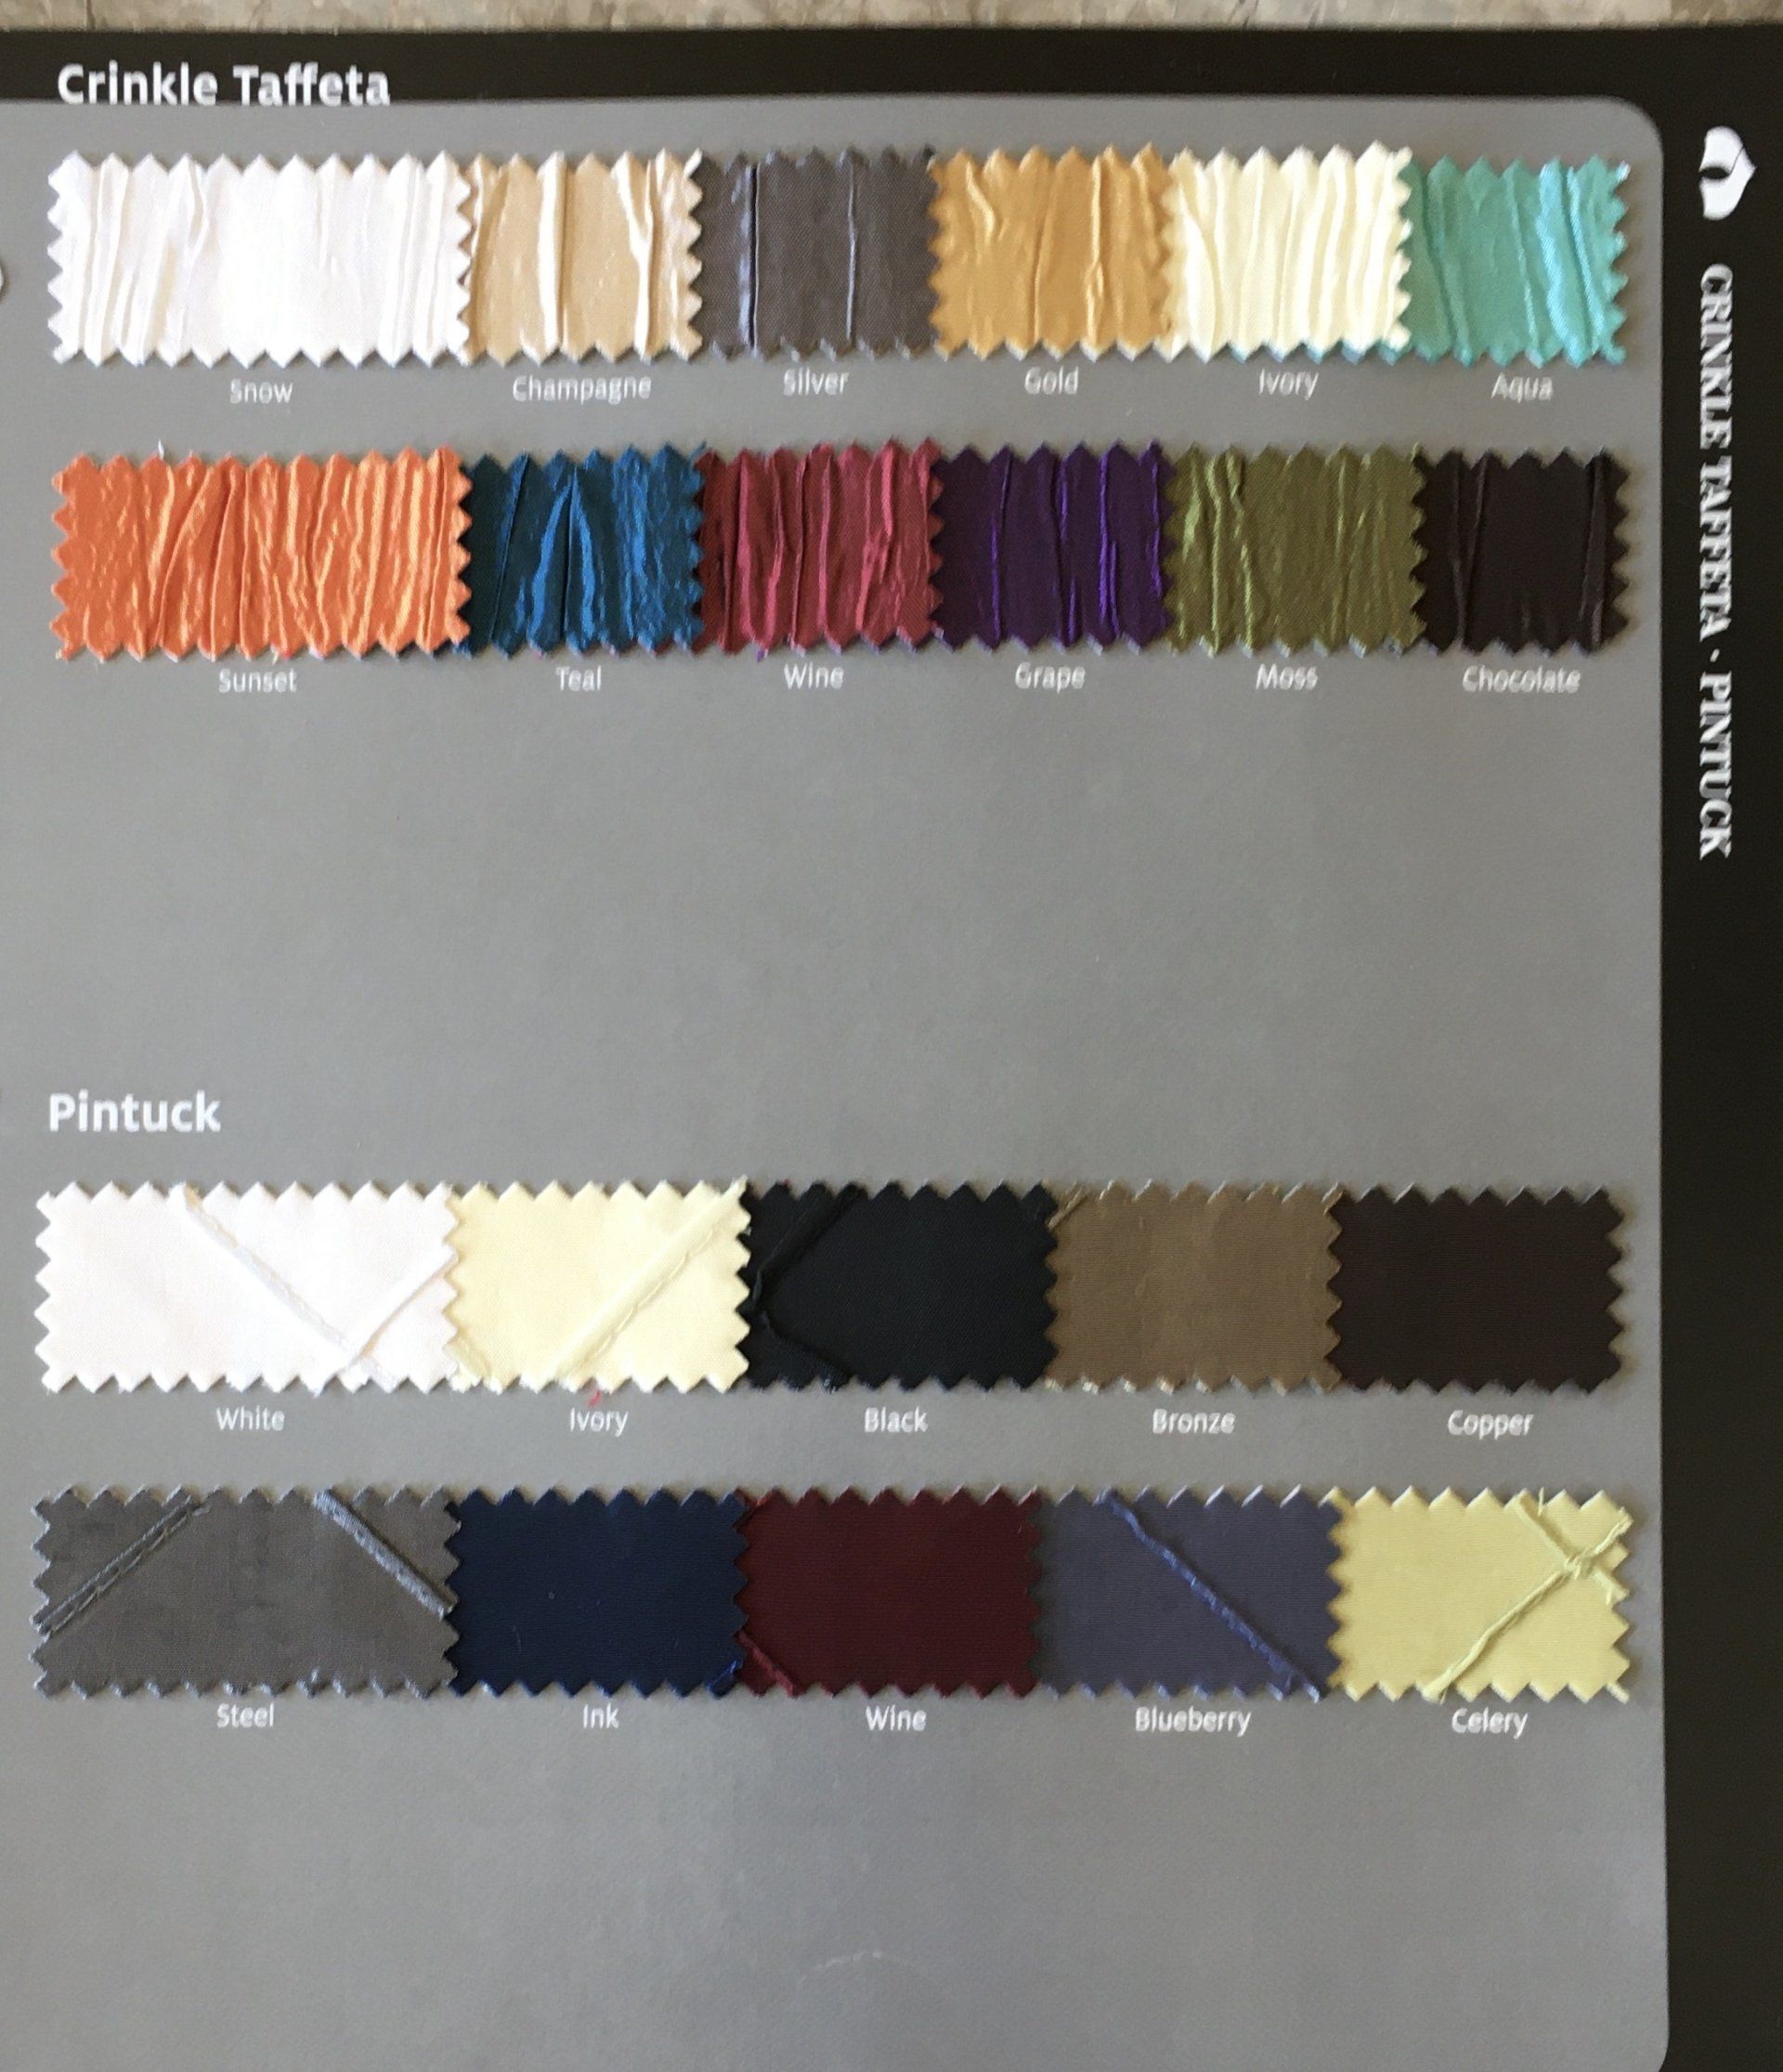 crinke taffeta and pintuck  linen swatches, offered by Premier Wedding & Party Rental